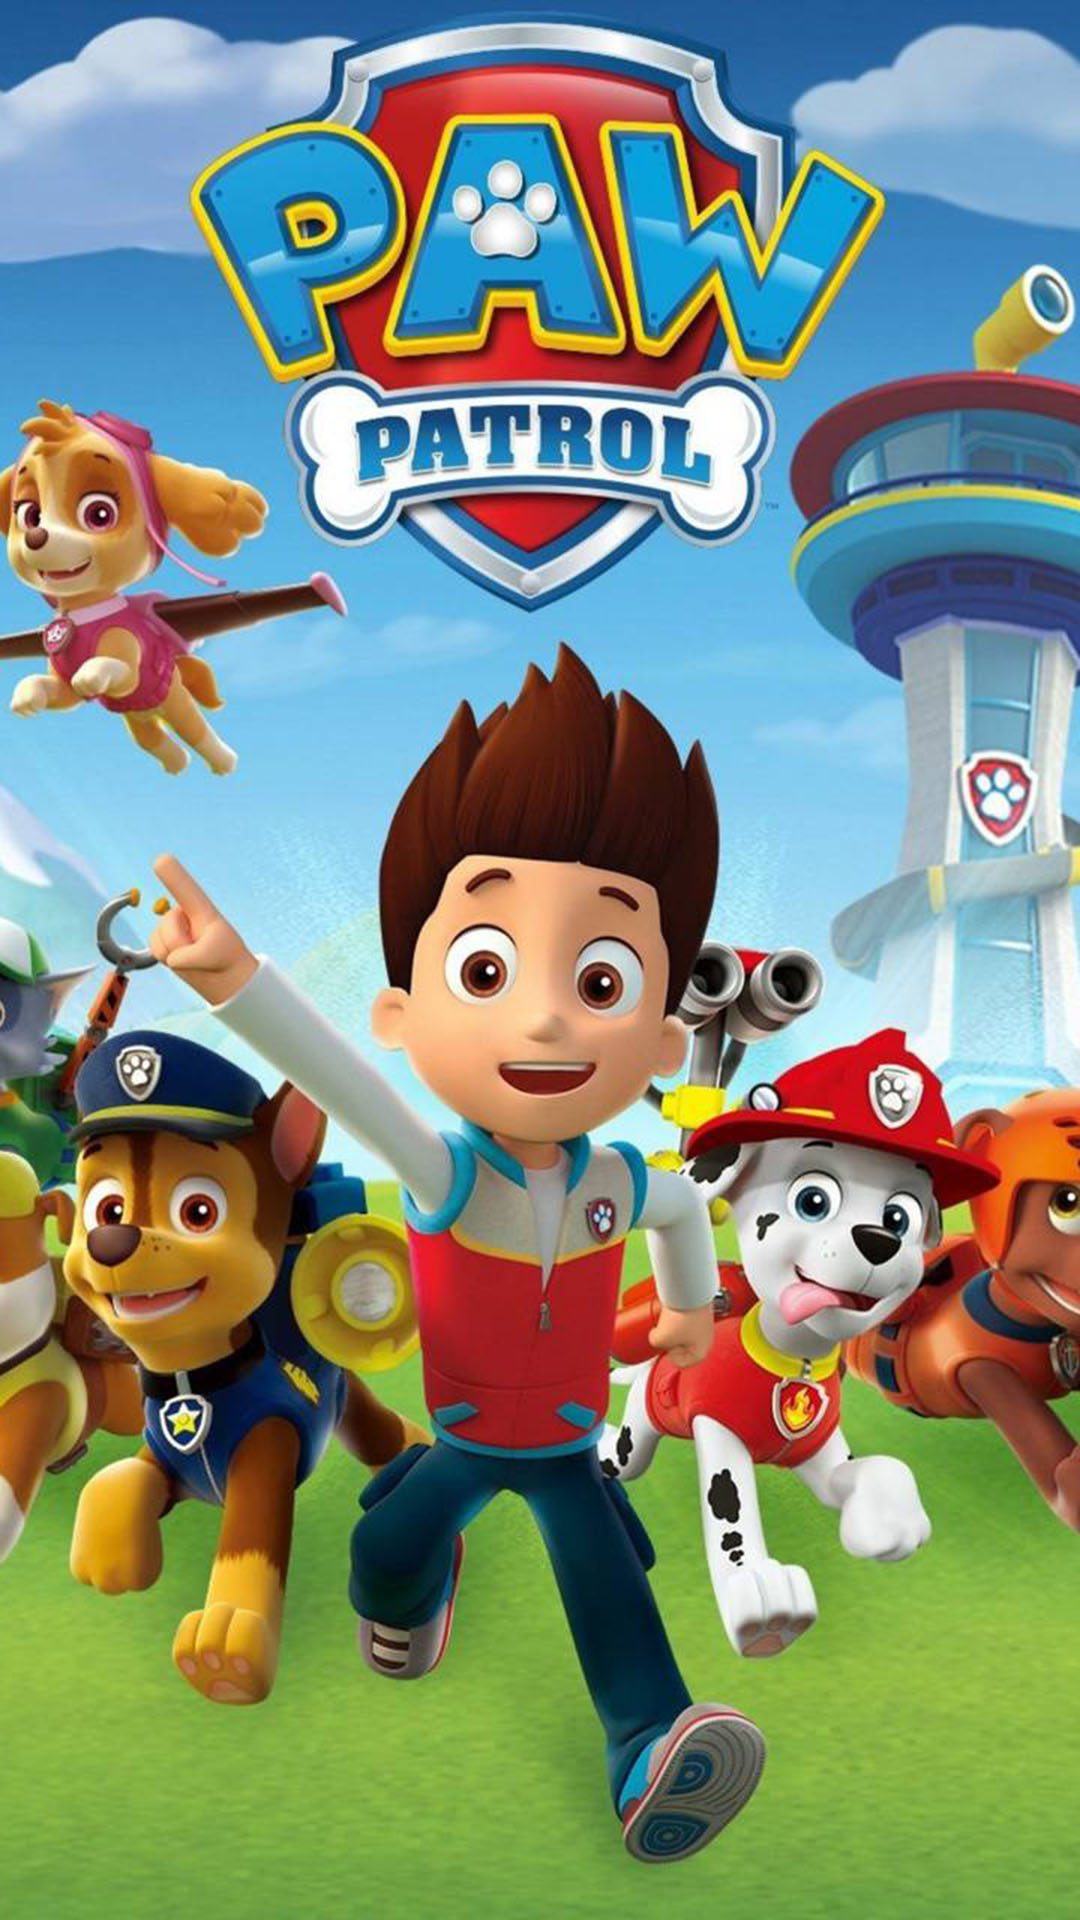 Paw Patrol backgrounds HD, Animated adventure, Canine heroes, Exciting missions, 1080x1920 Full HD Phone